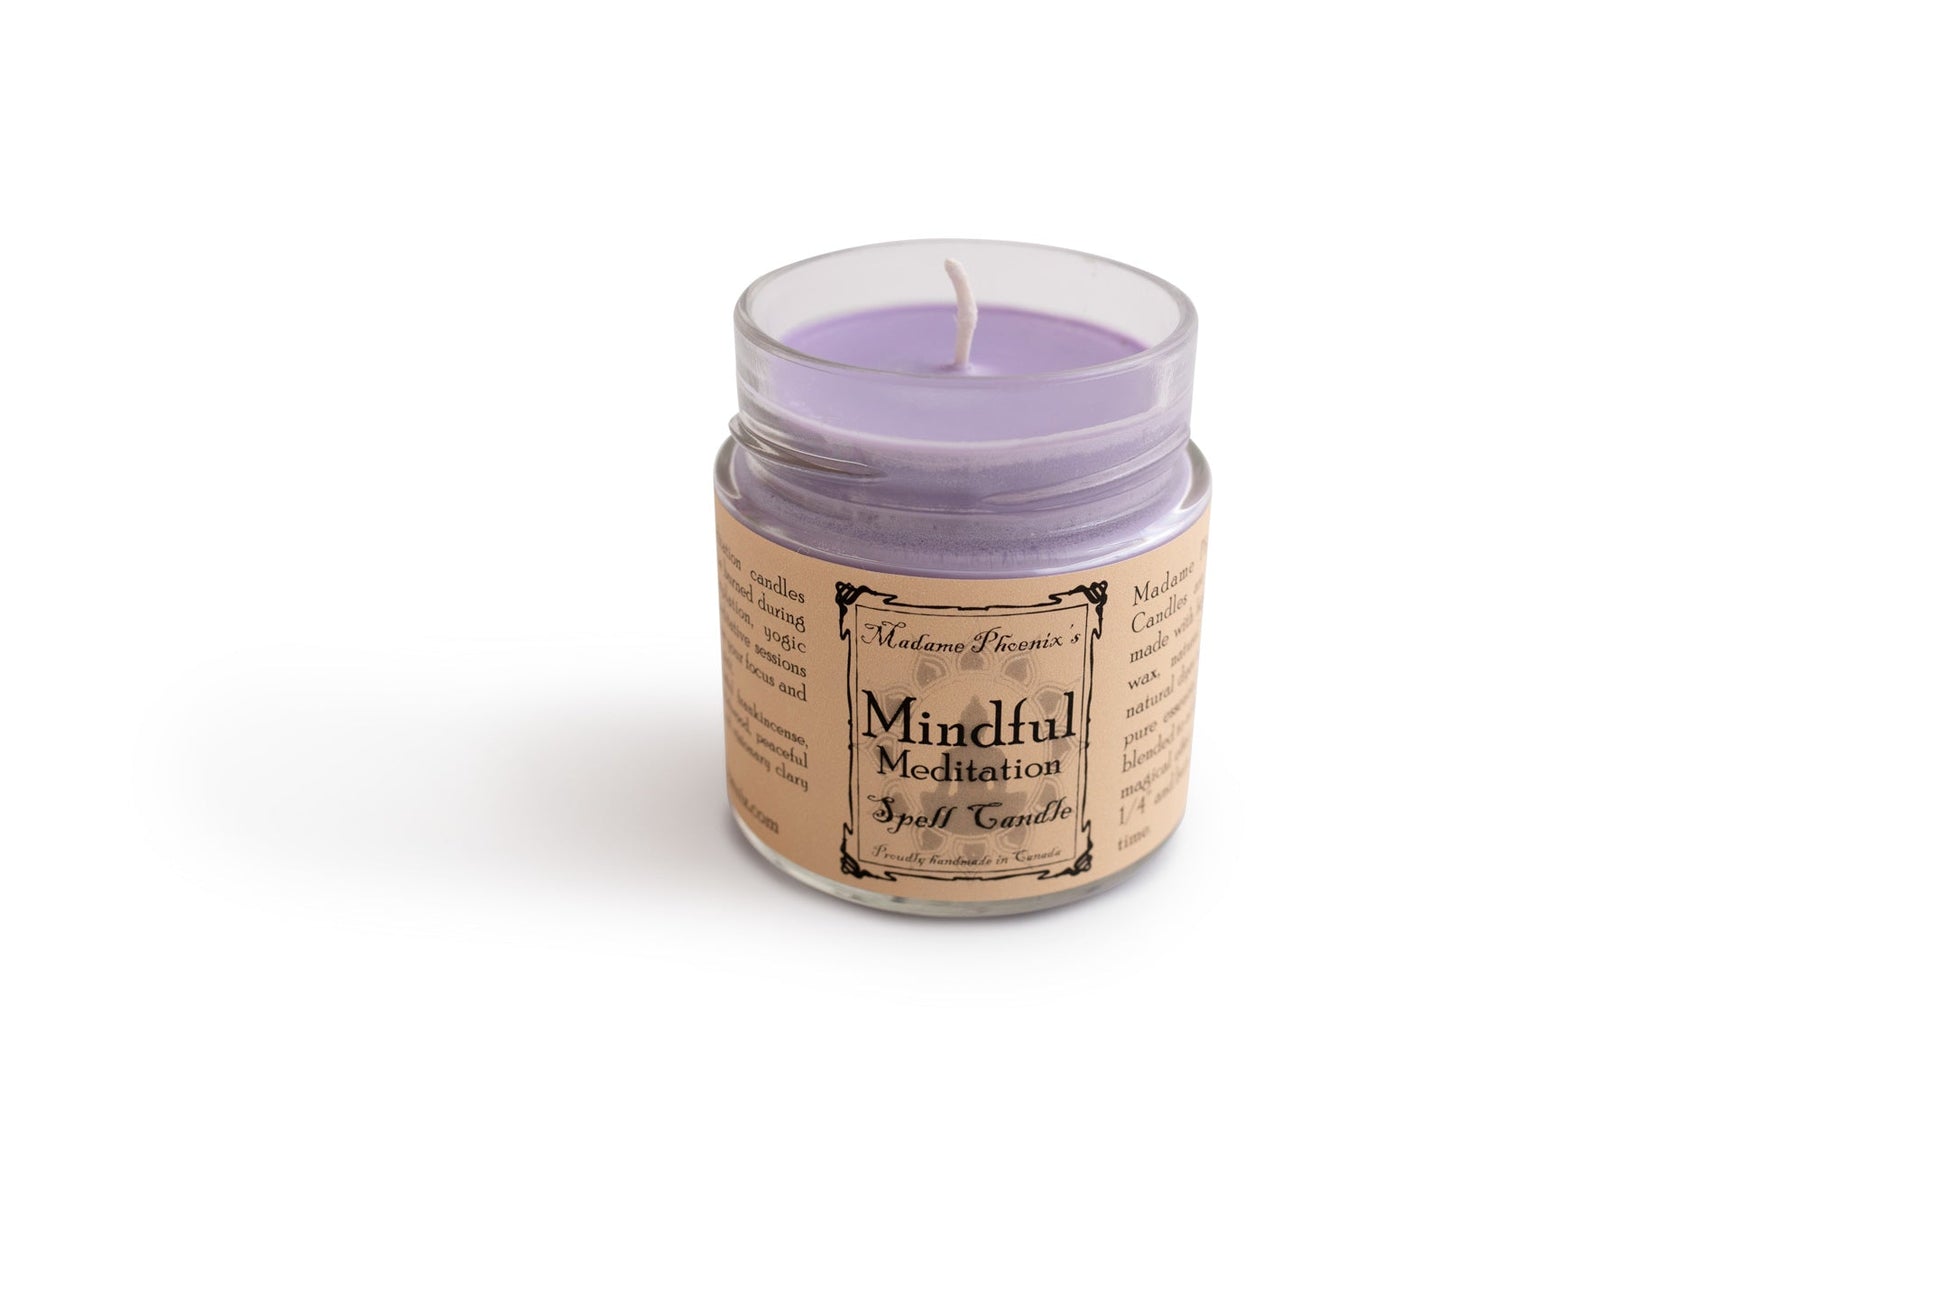 Madame Phoenix's Mindful Meditation Spell Candle